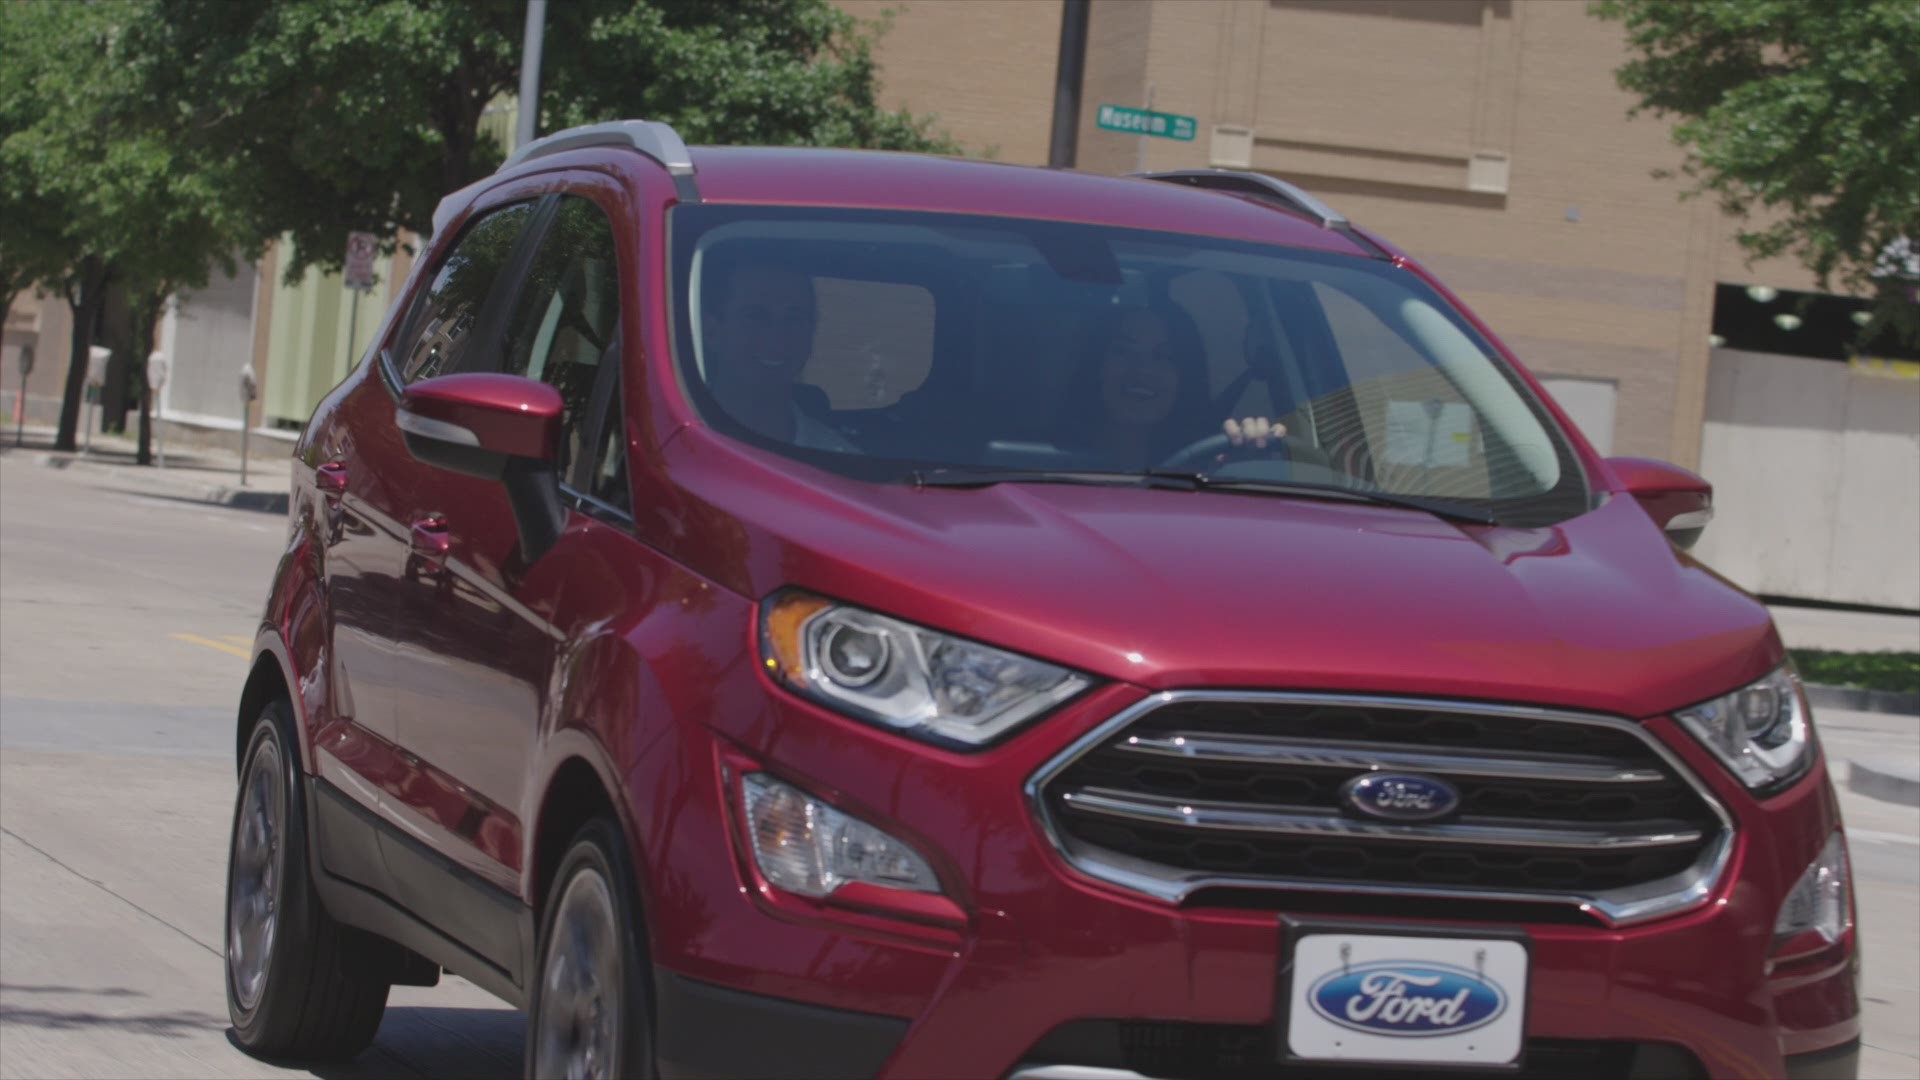 Join GMT's Alanna Sarabia and her guest Anthony Coli for his First-Ever Bungee Jump Experience, presented by the First-Ever Ford EcoSport. Visit wfaa.com/firsttime to register to win your own First-Ever DFW Experience.(Sponsored Content)